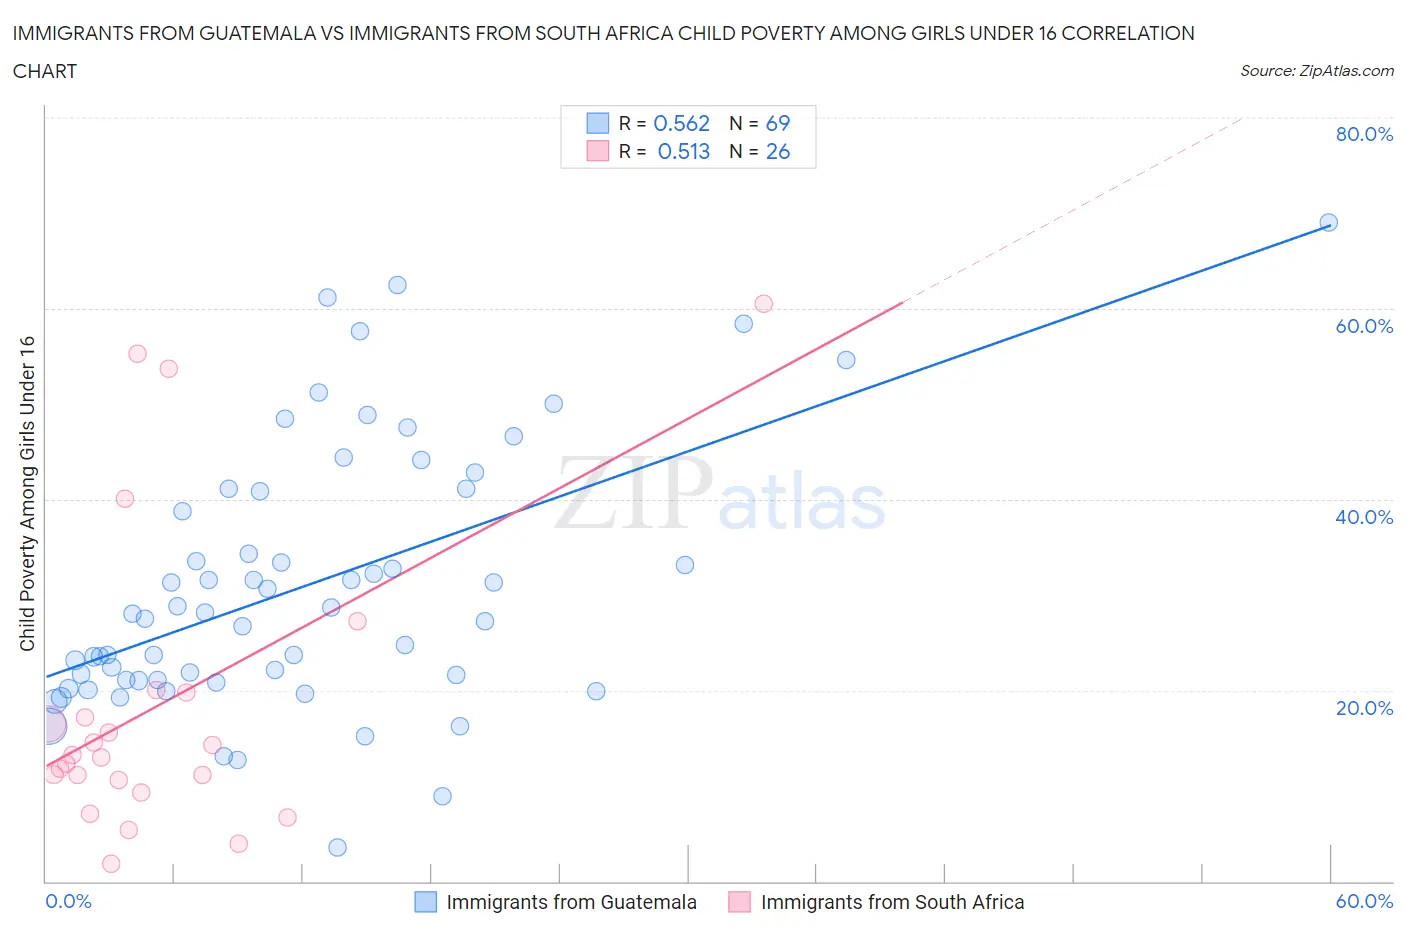 Immigrants from Guatemala vs Immigrants from South Africa Child Poverty Among Girls Under 16